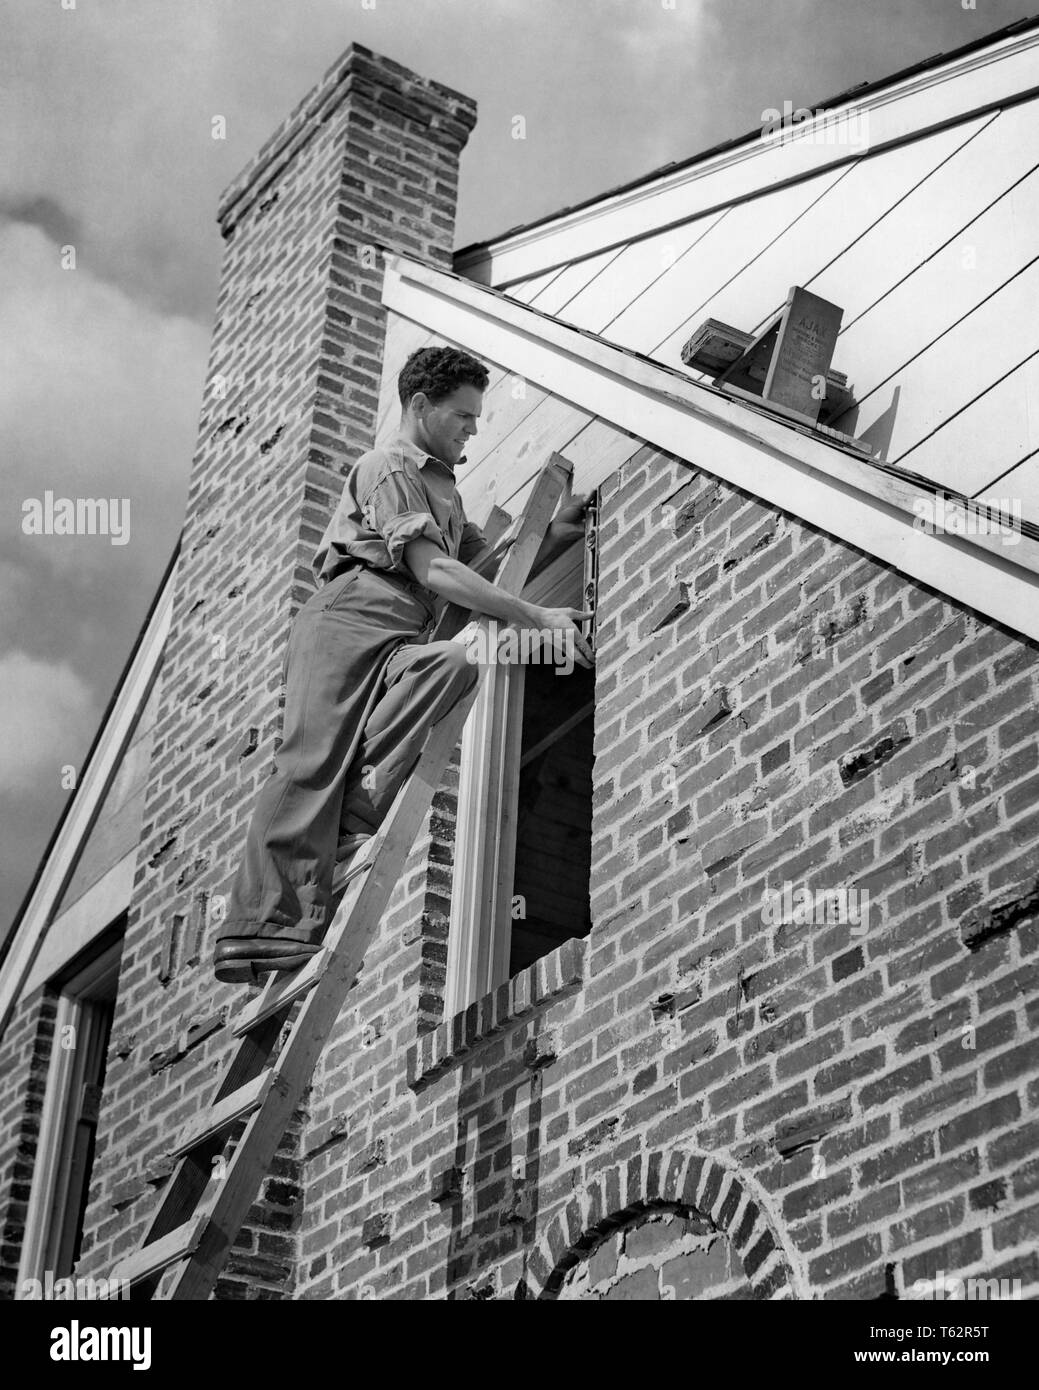 1940s WORKMAN ON STEPLADDER FITTING A NEW WINDOW ON BRICK HOUSE - b11694 HAR001 HARS RESIDENTIAL MALES RISK BUILDINGS PROFESSION CONFIDENCE B&W SKILL OCCUPATION SKILLS PROPERTY STRENGTH CAREERS EXTERIOR FITTING KNOWLEDGE LABOR EMPLOYMENT HOMES OCCUPATIONS REAL ESTATE CONCEPTUAL STRUCTURES RESIDENCE EDIFICE EMPLOYEE STEPLADDER YOUNG ADULT MAN BLACK AND WHITE CAUCASIAN ETHNICITY HAR001 INSTALLING LABORING OLD FASHIONED Stock Photo